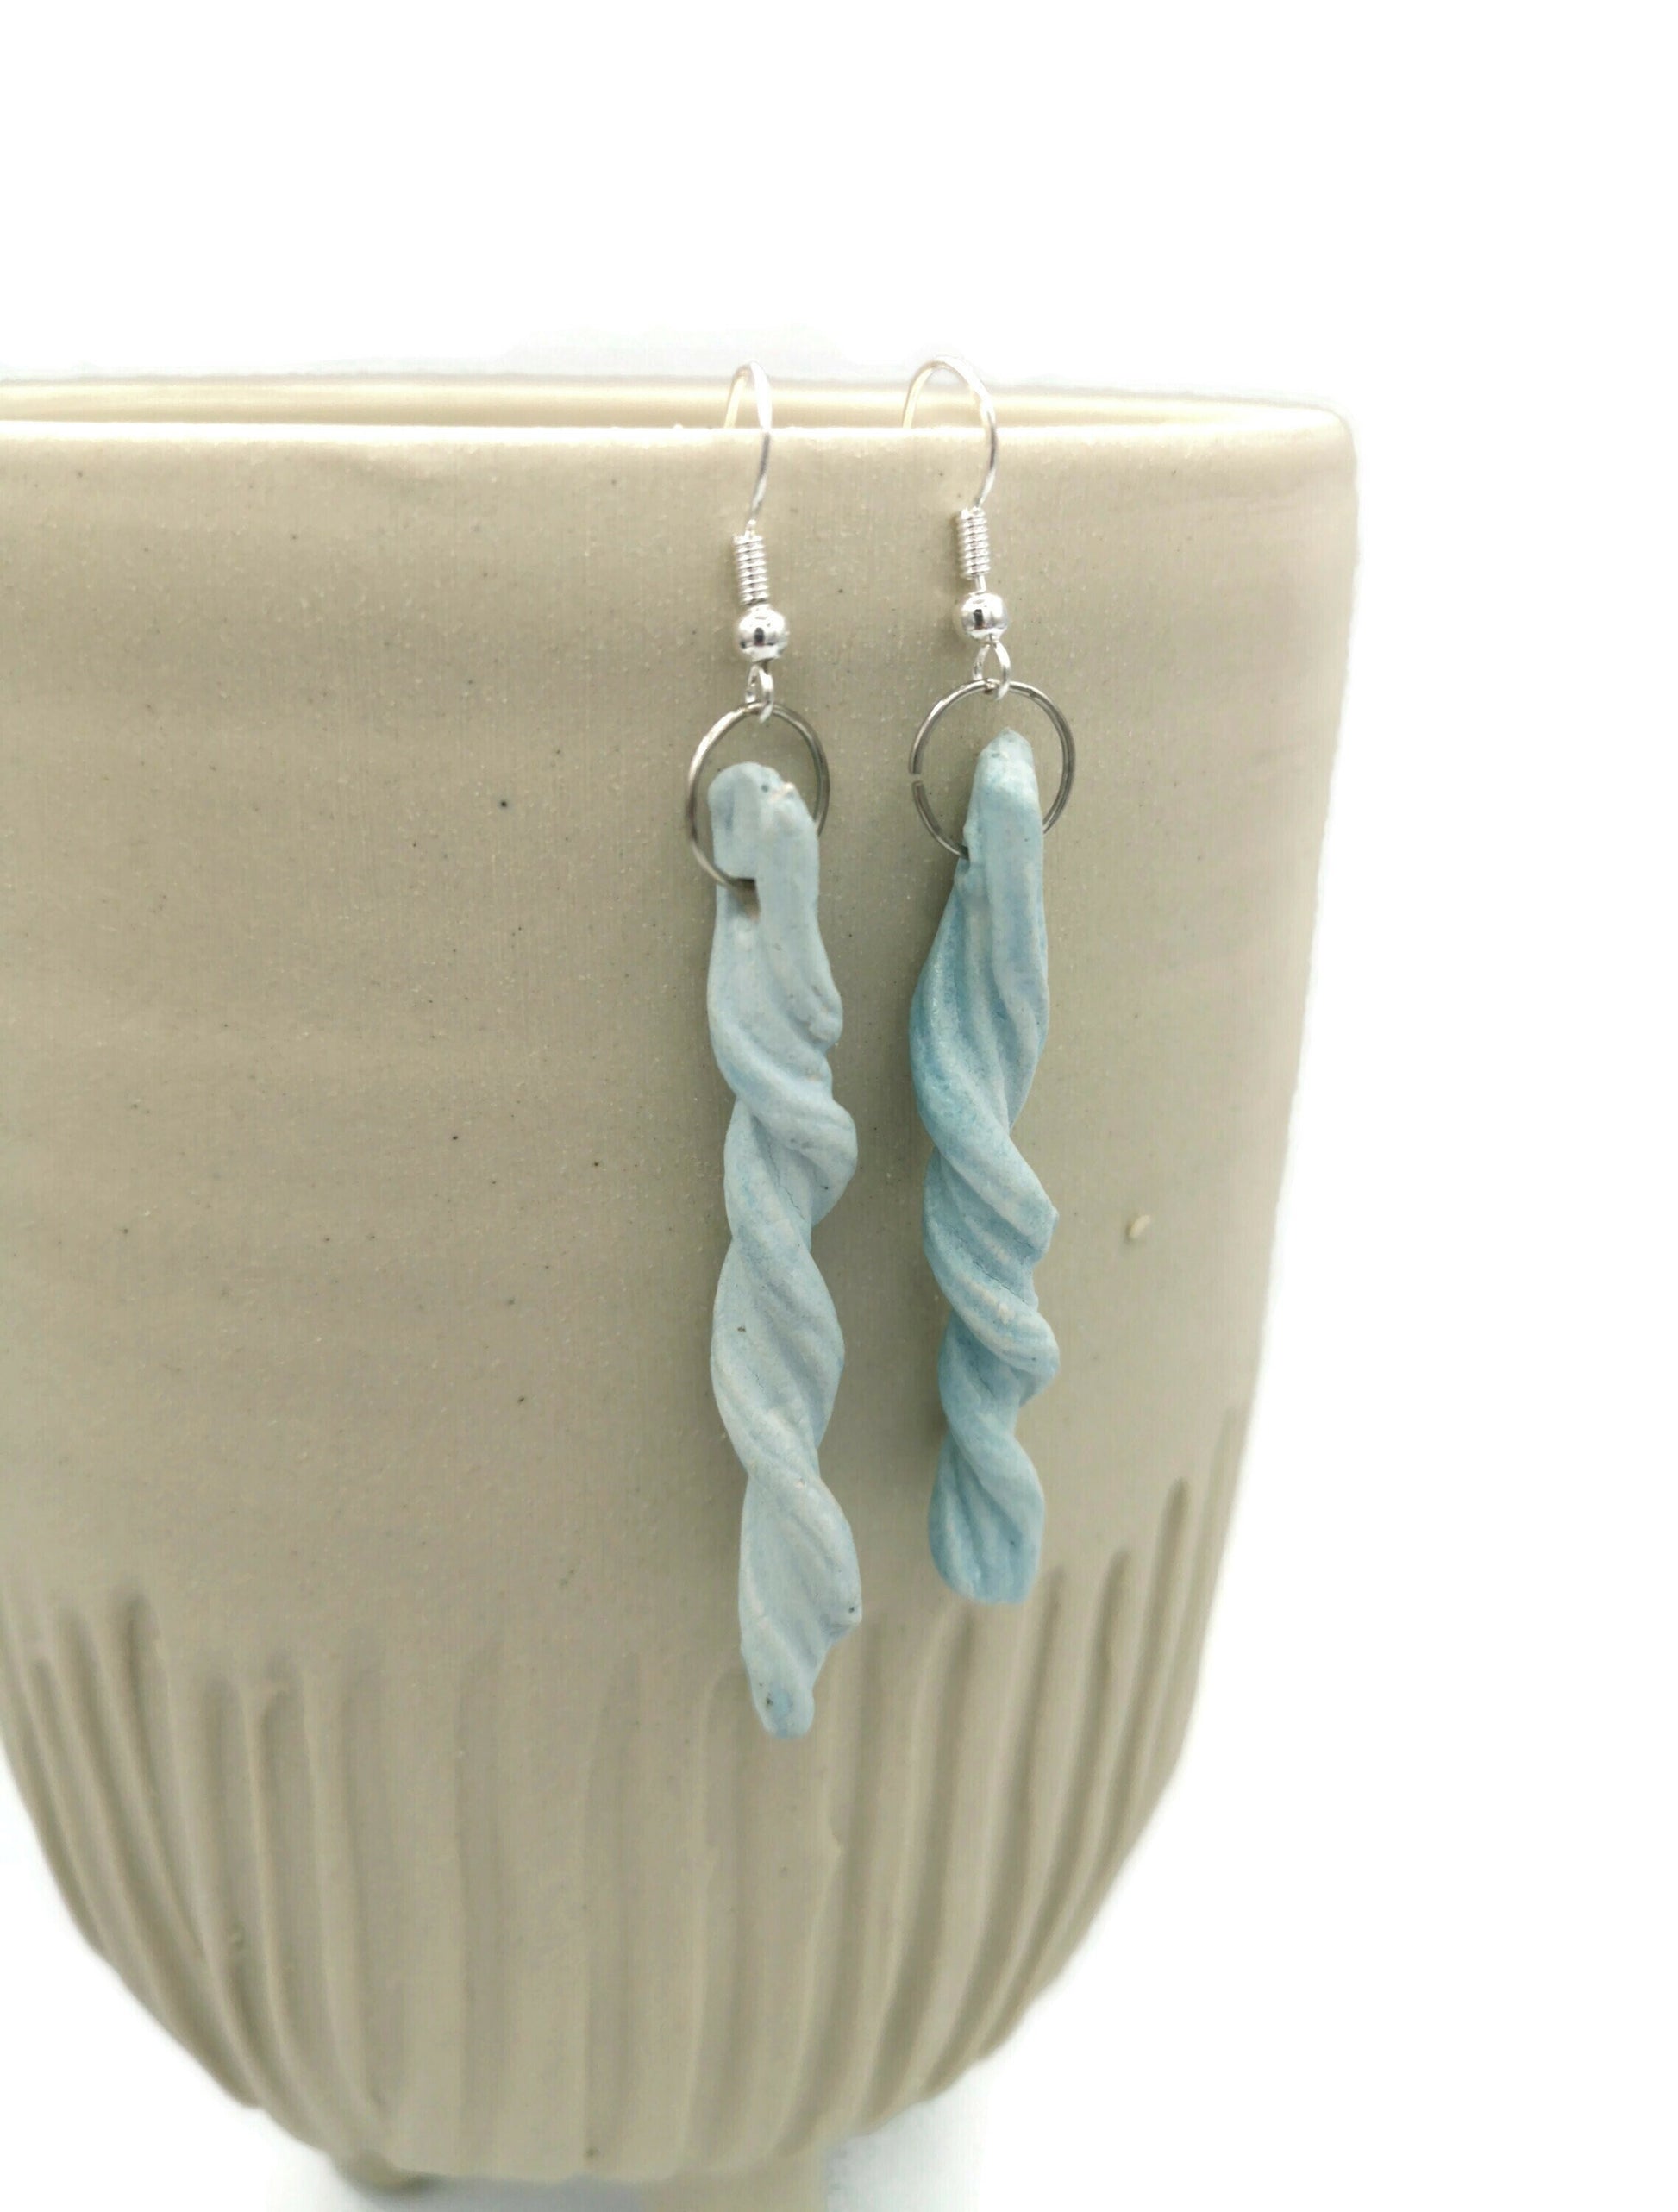 Handmade Ceramic Long Earrings Turquoise Blue With Sterling Silver Ear Wire, Boho Drop Earrings, 9th Anniversary Gift For Wife - Ceramica Ana Rafael